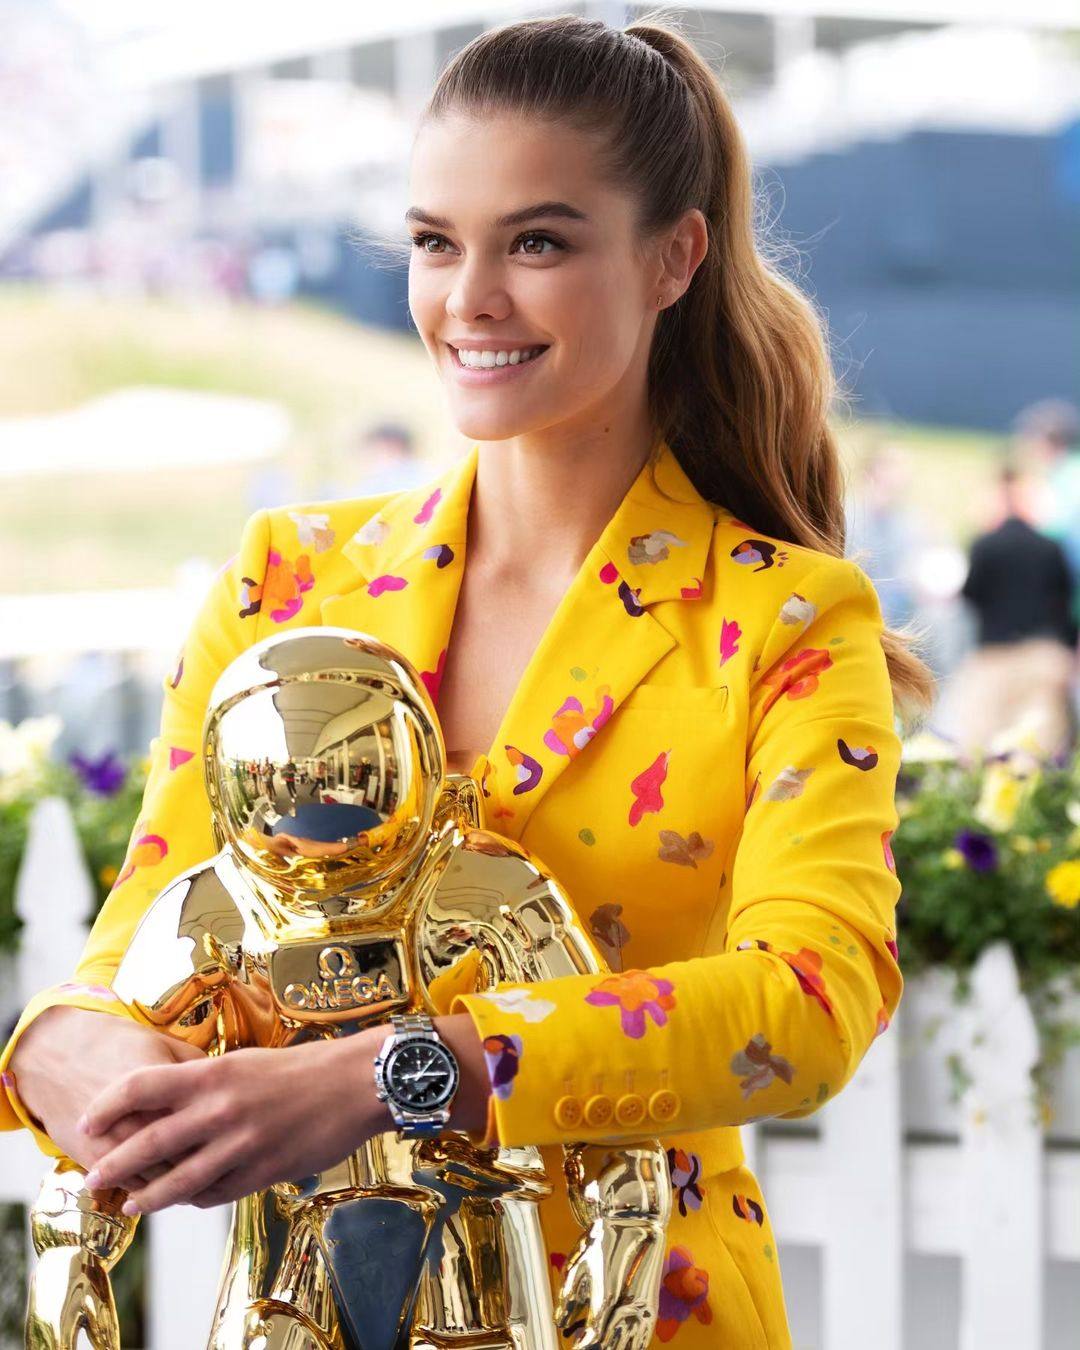 Nina Agdal has Danish roots and her meteoric rise to fame began when she modelled for a Sports Illustrated cover. Photo: @ninaadgal/Instagram